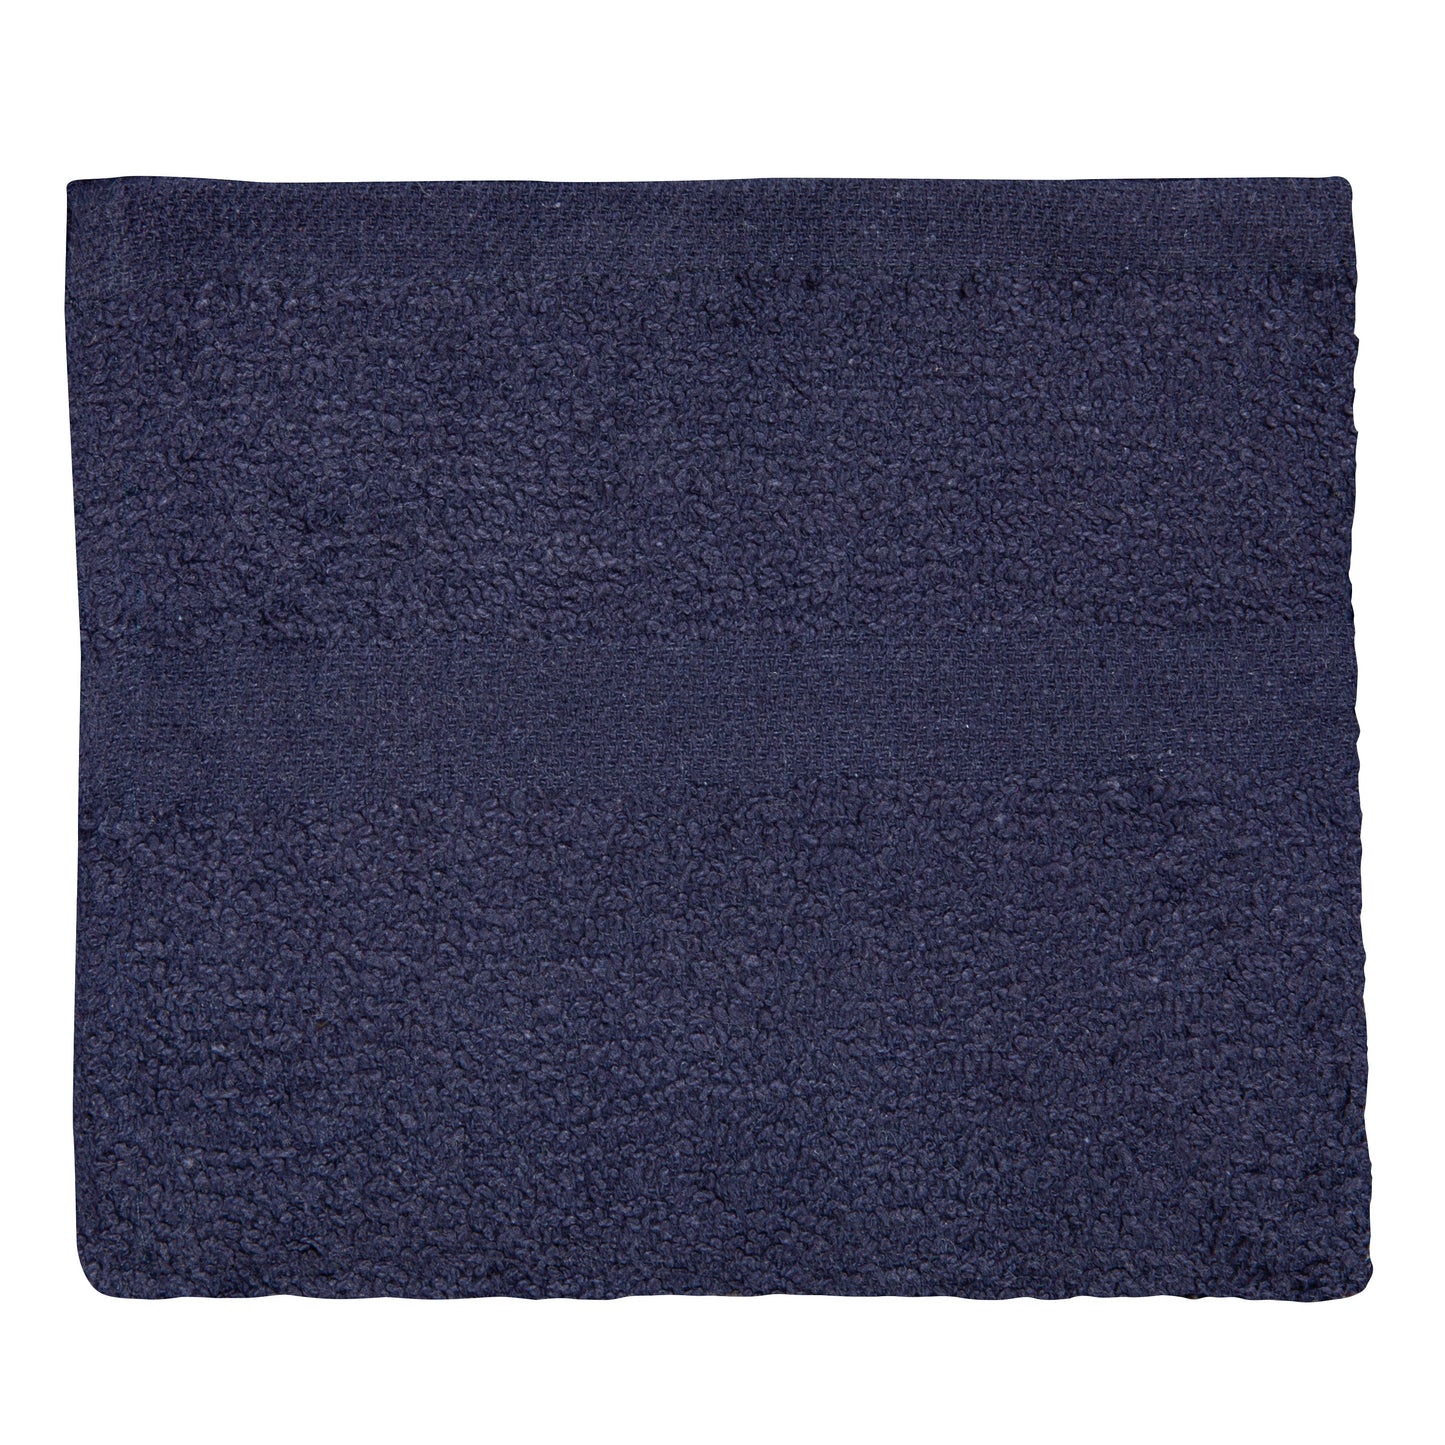 American Dawn | 16X27 Inch Navy Blue With Single Cam Healthcare Towel | Hand Towel